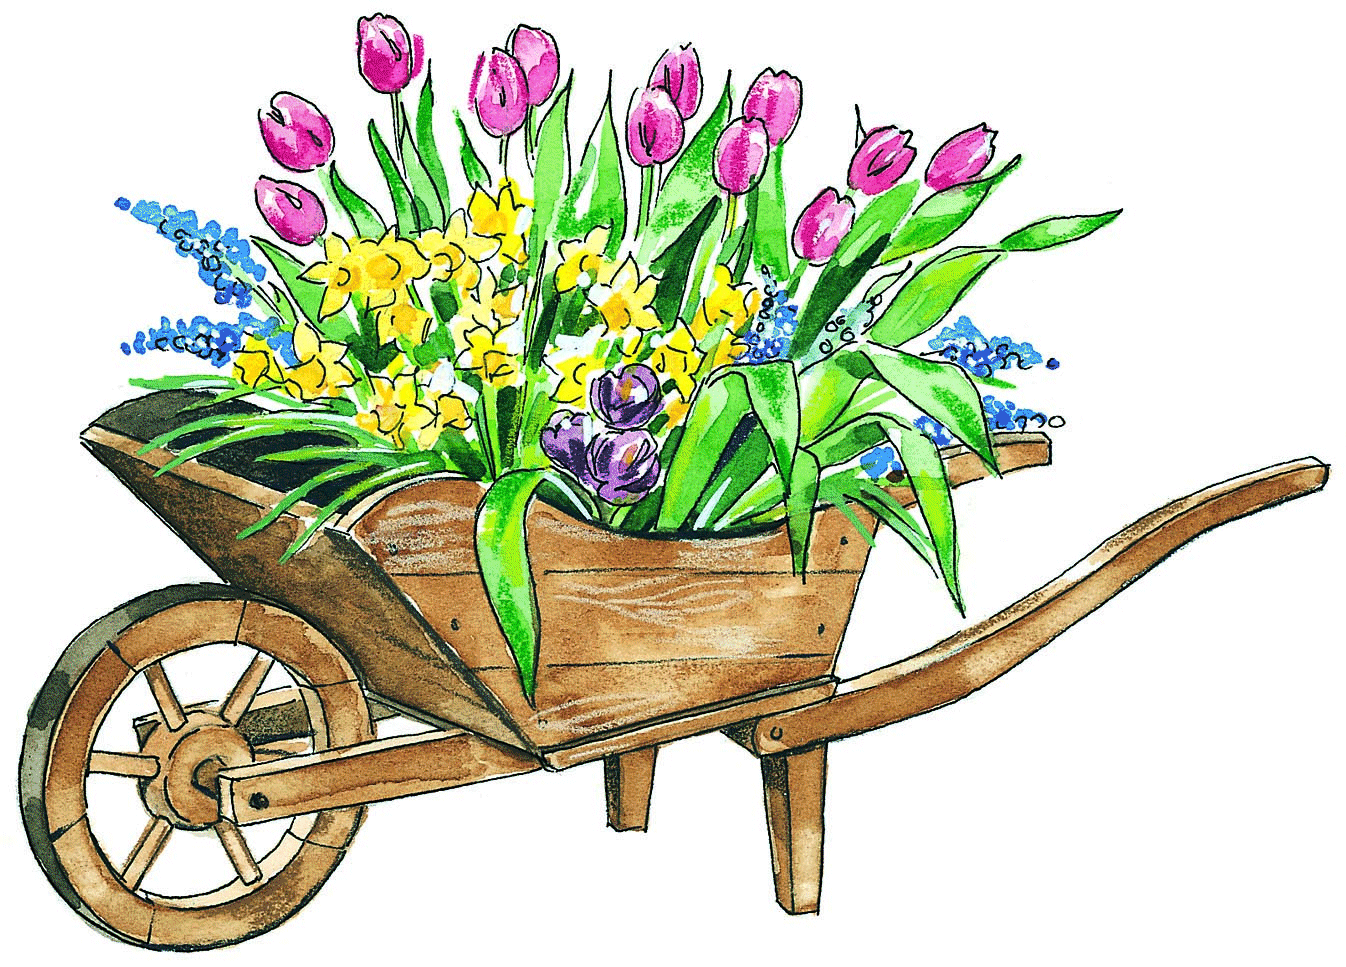 may clipart plant